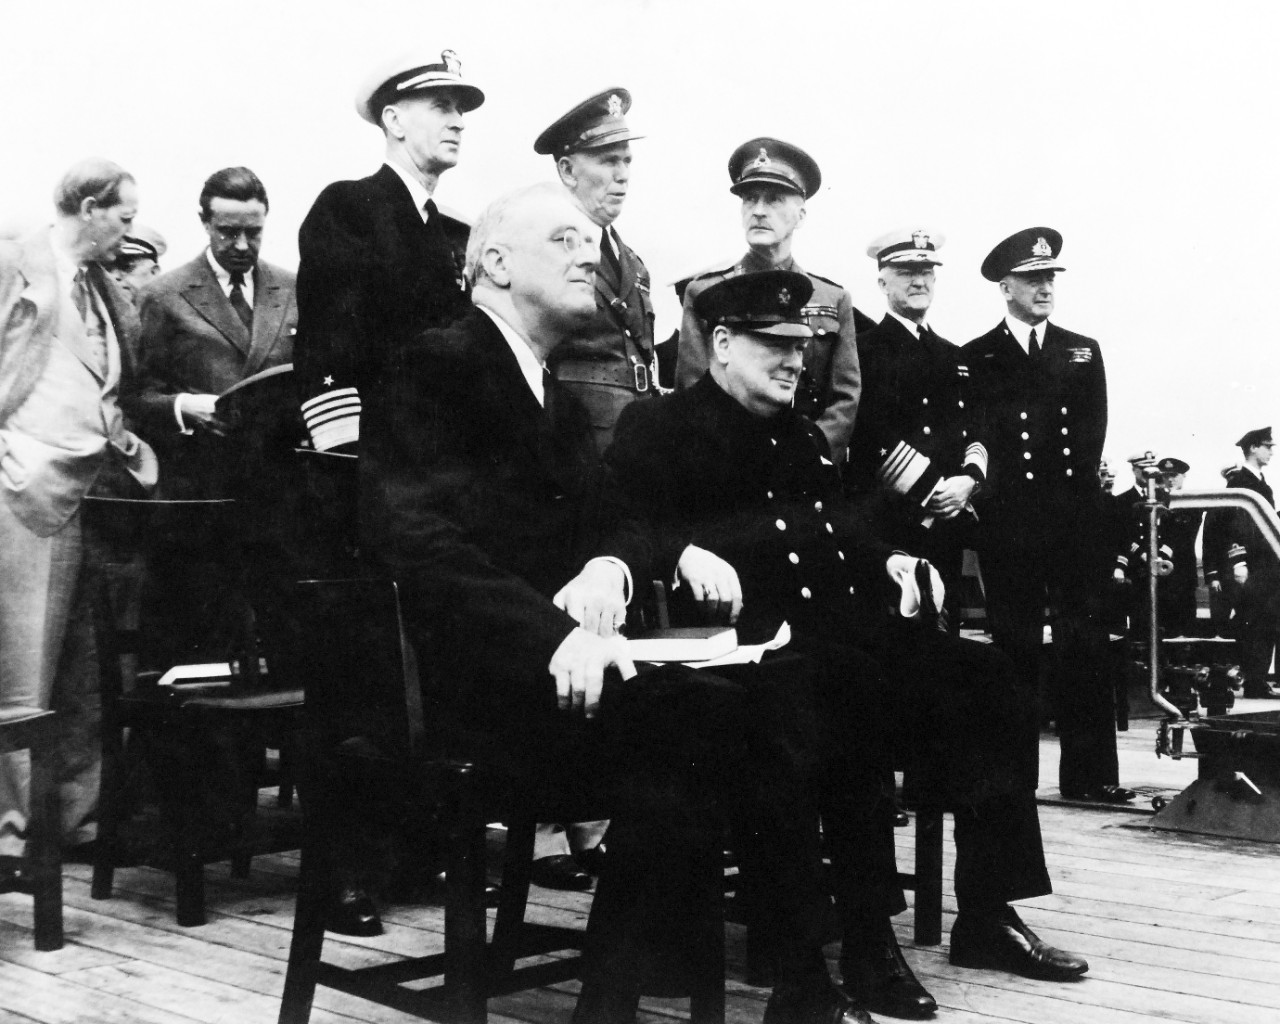 80-G-26850: Atlantic Charter, August 1941.  Informal group on deck of Royal Navy battleship HMS Prince of Wales following church services during the Atlantic Charter meeting.   Standing, left to right:  Harry Hopkins; Averill Harriman; Admiral Ernest J. King; General George C. Marshall; General Sir John Dill; Admiral Harold R. Stark; Admiral Sir Dudley Pound.  Seated:  President Franklin D. Roosevelt and Prime Minister Winston S. Churchill.   Photograph released August 10, 1941.   Official U.S. Navy Photograph, now in the collections of the National Archives.  (2016/03/22).